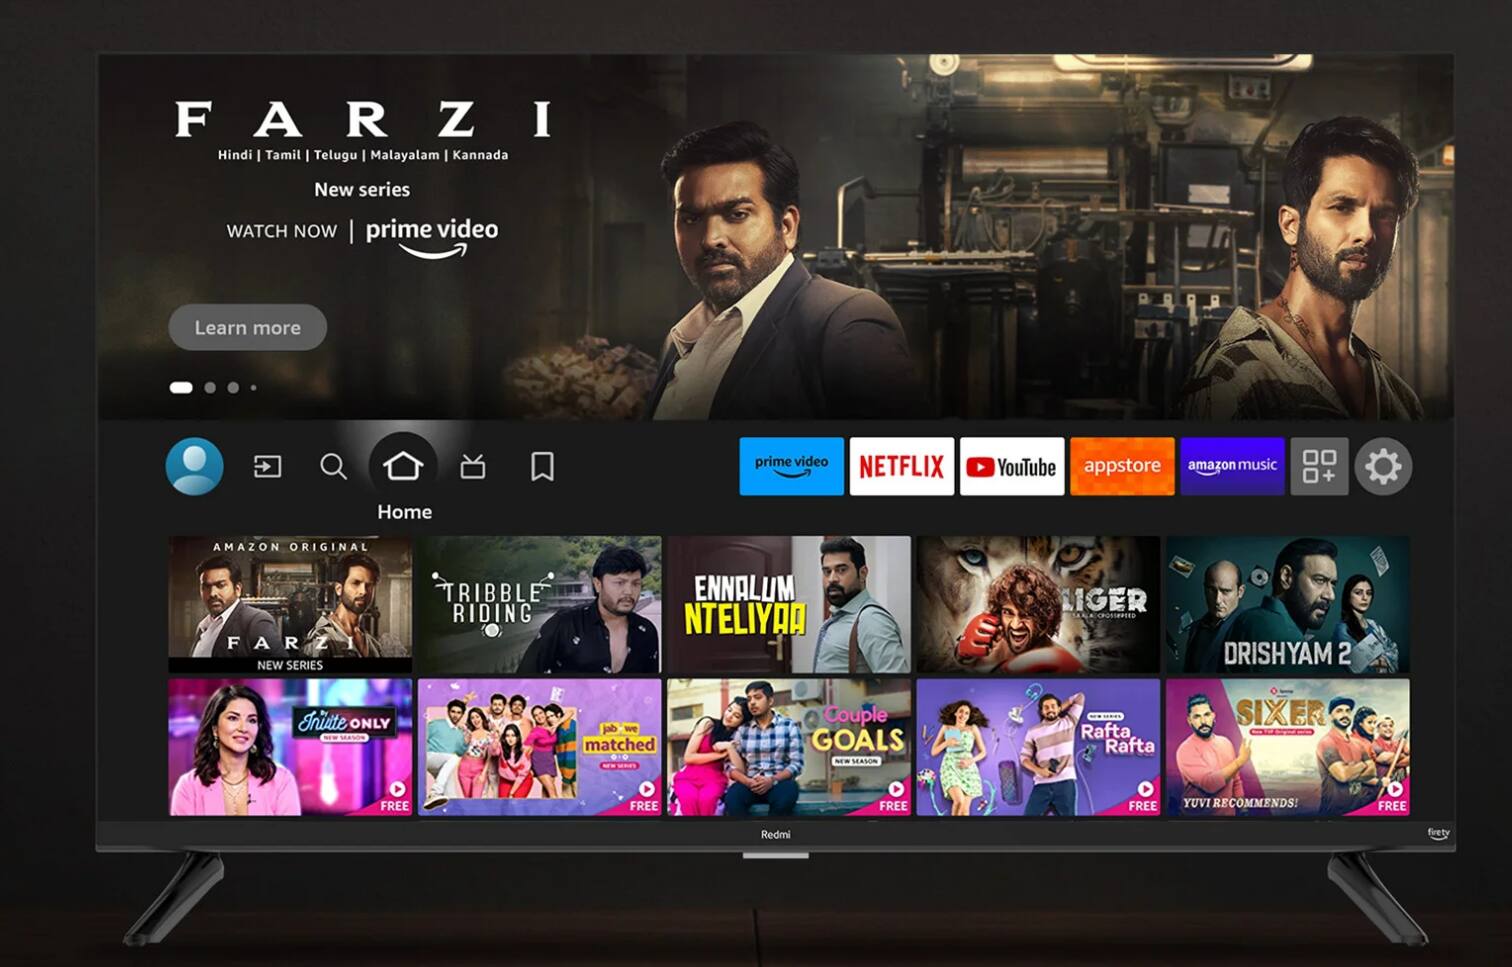 Amazon aims to expand its Fire TV business in India through partnerships